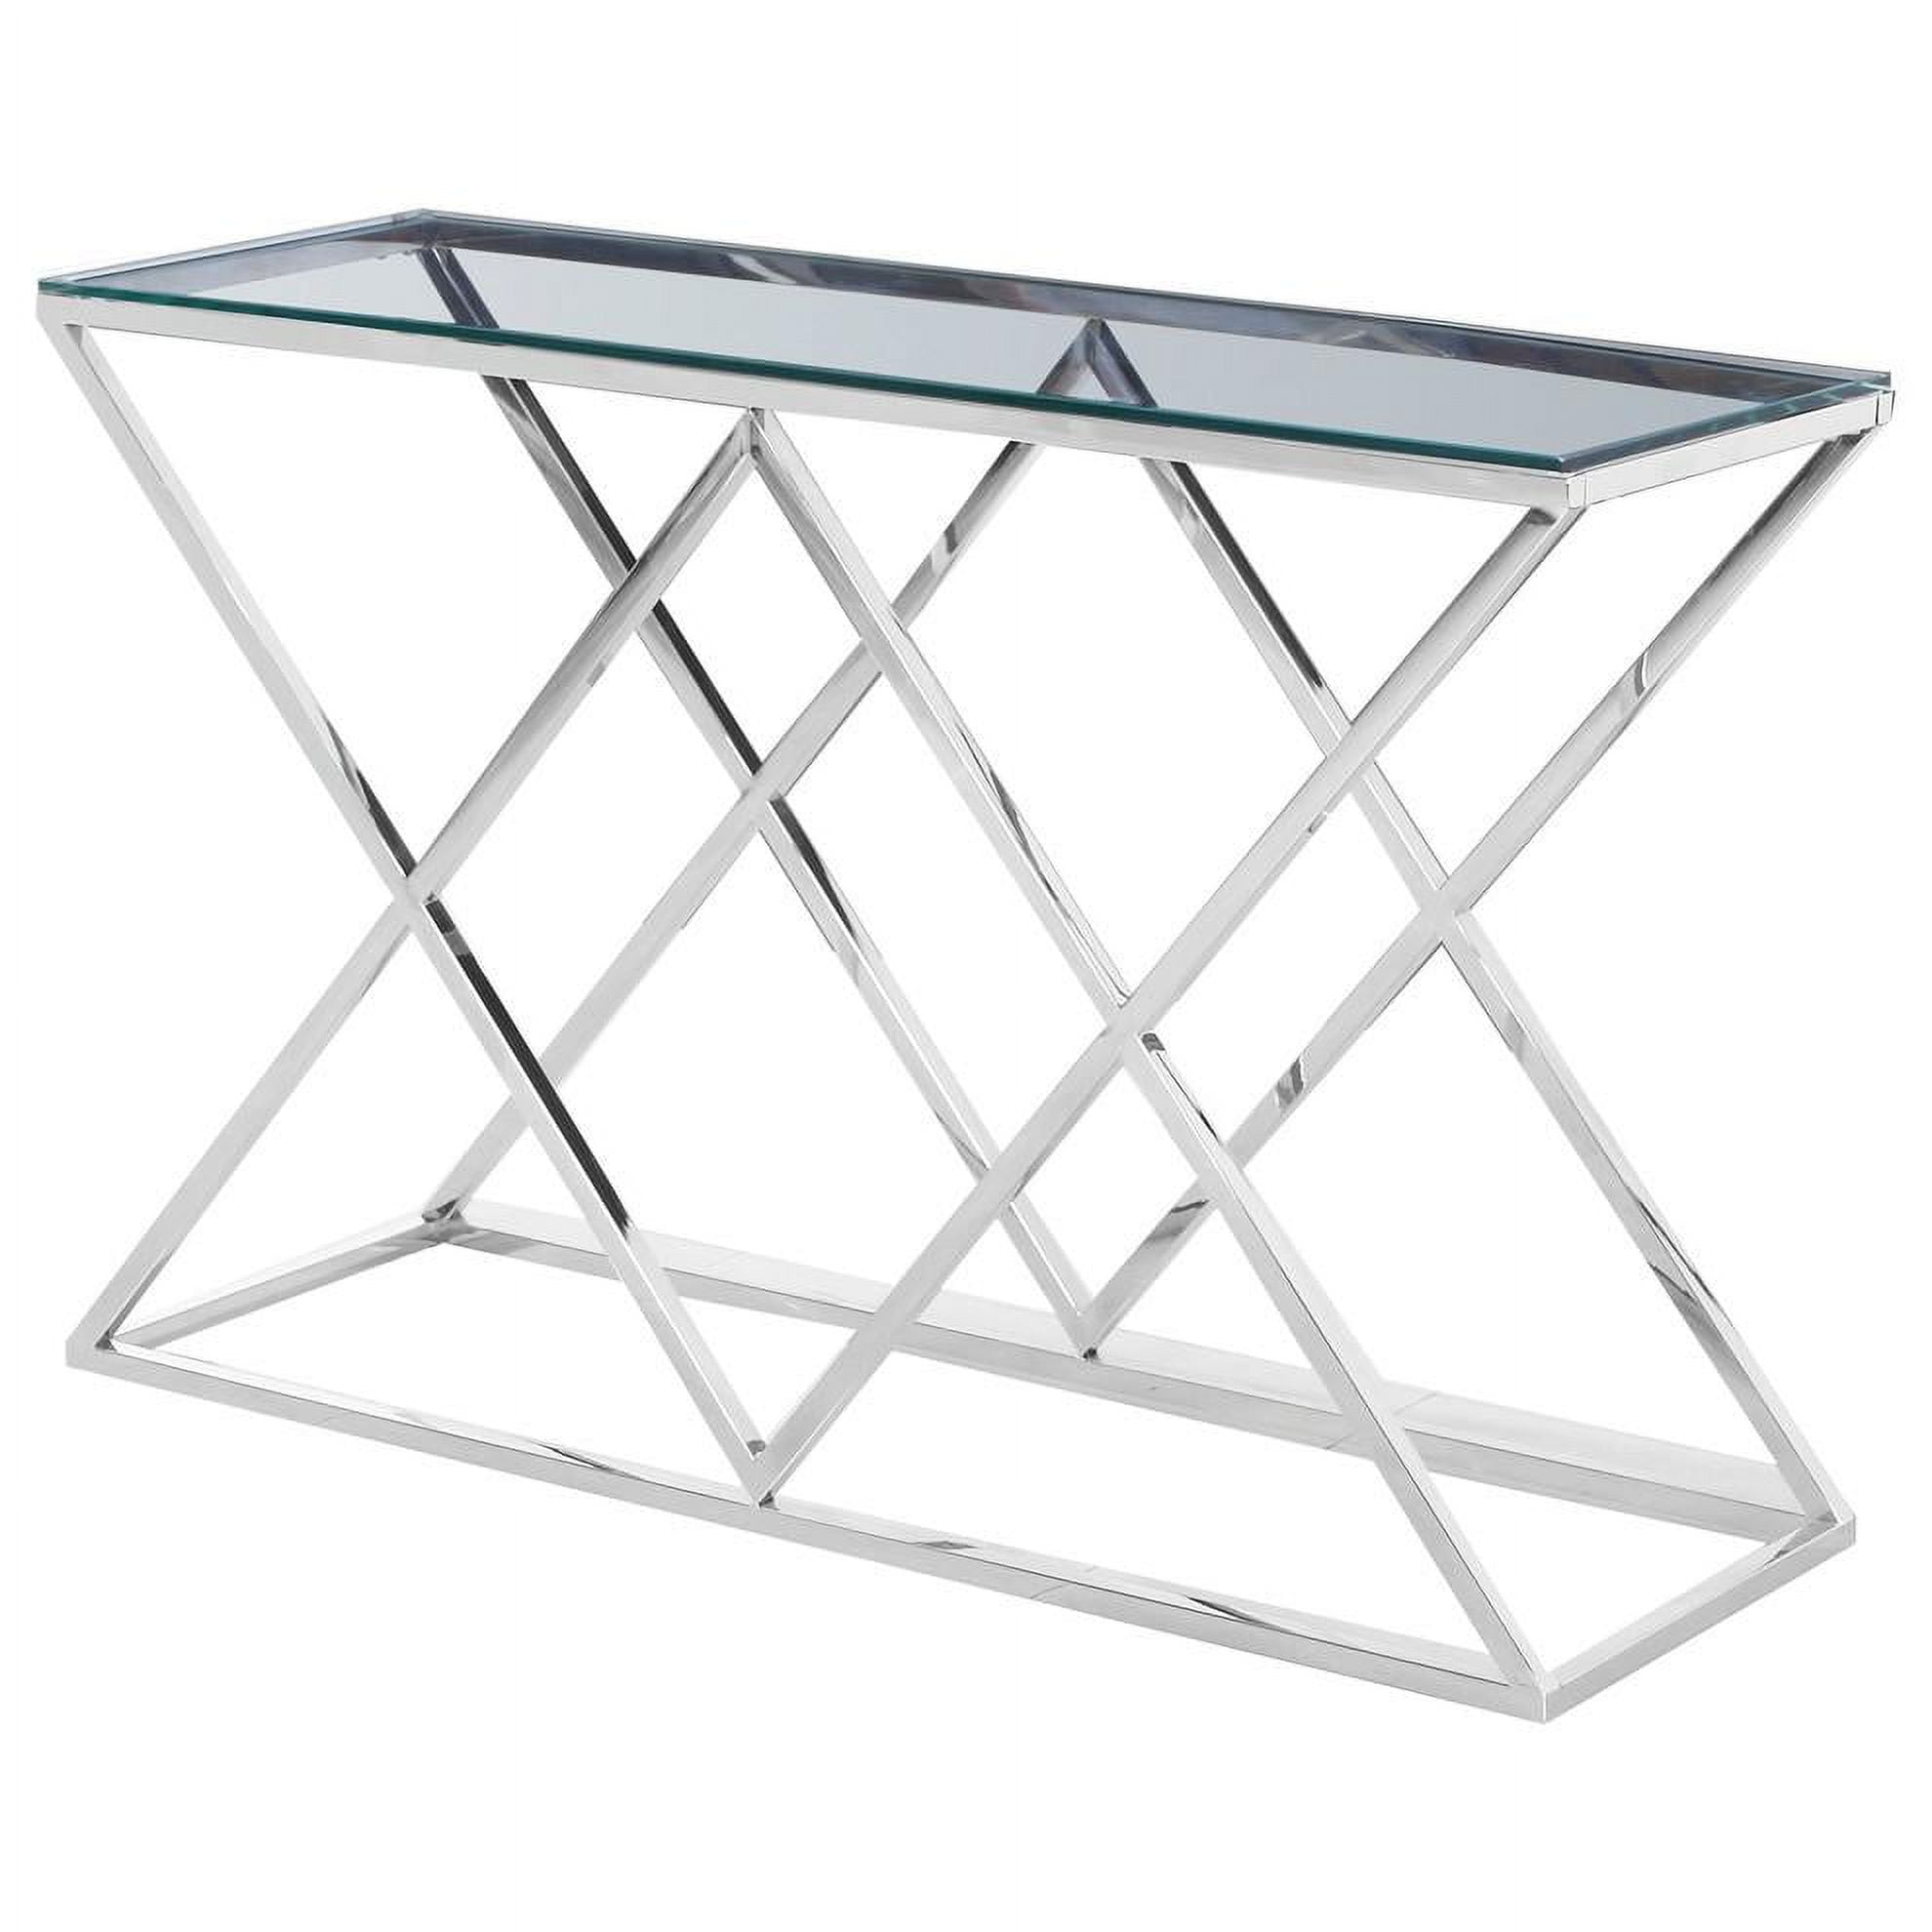 E48 Silver Sofa Table Angled Stainless Steel Clear Glass Sofa Table, Silver